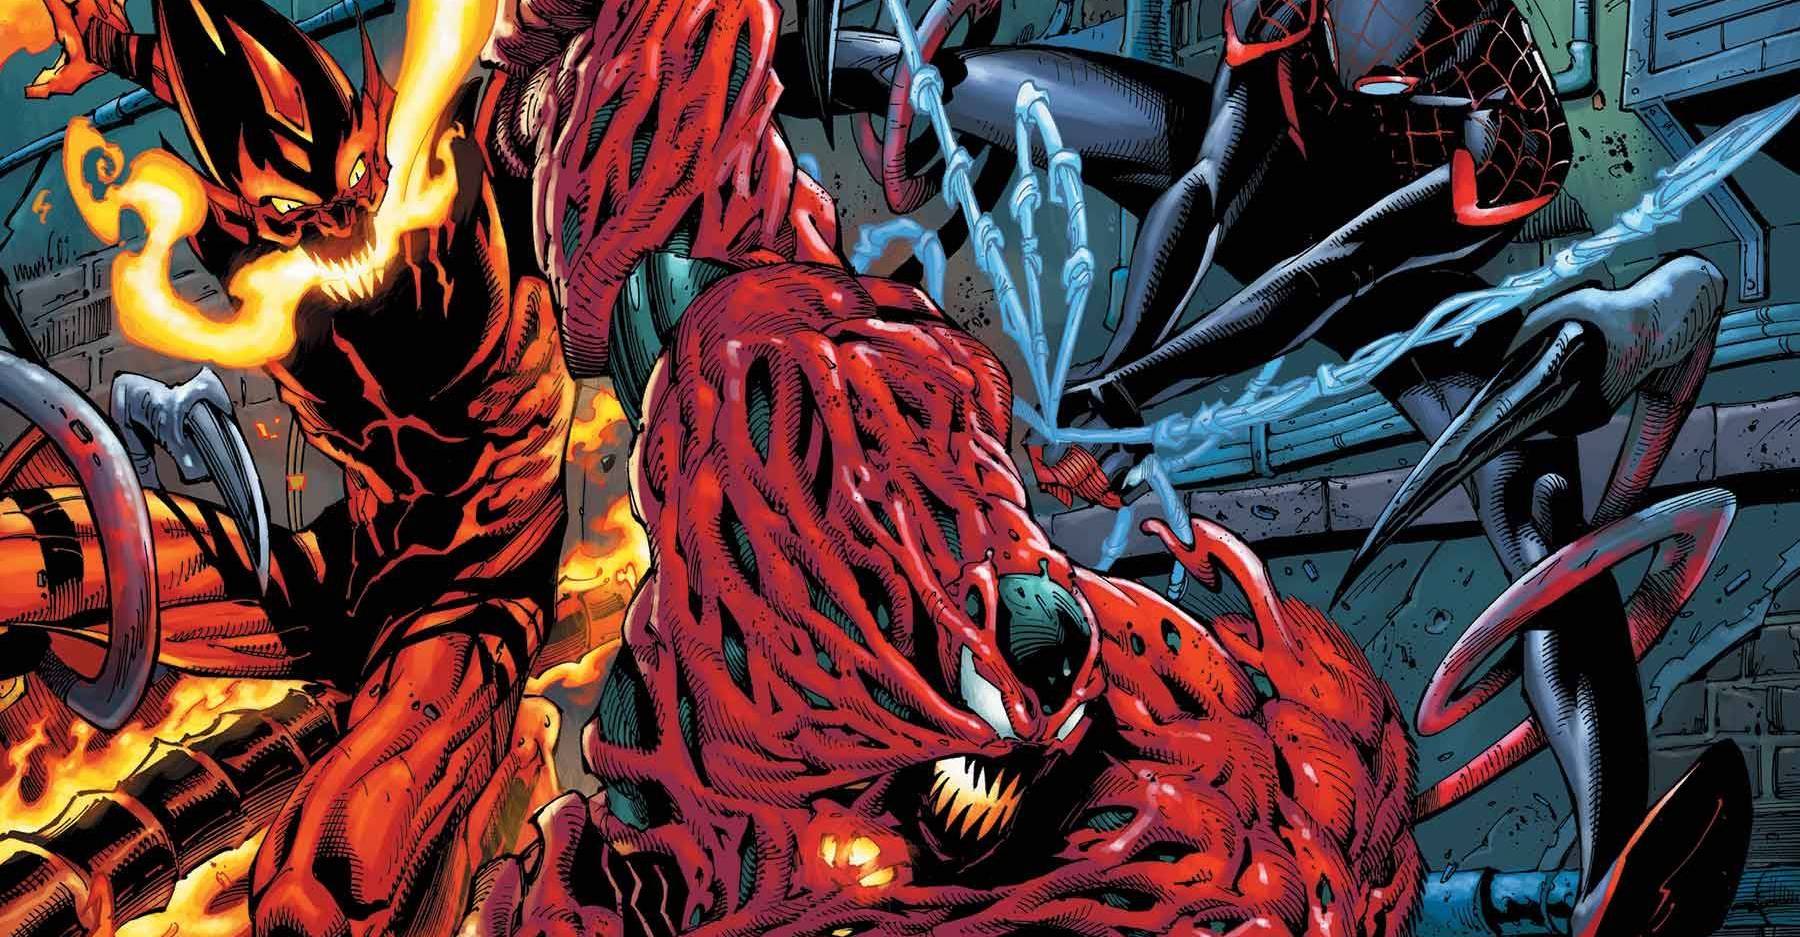 'Carnage Reigns: Alpha' #1 sets up a good horror story